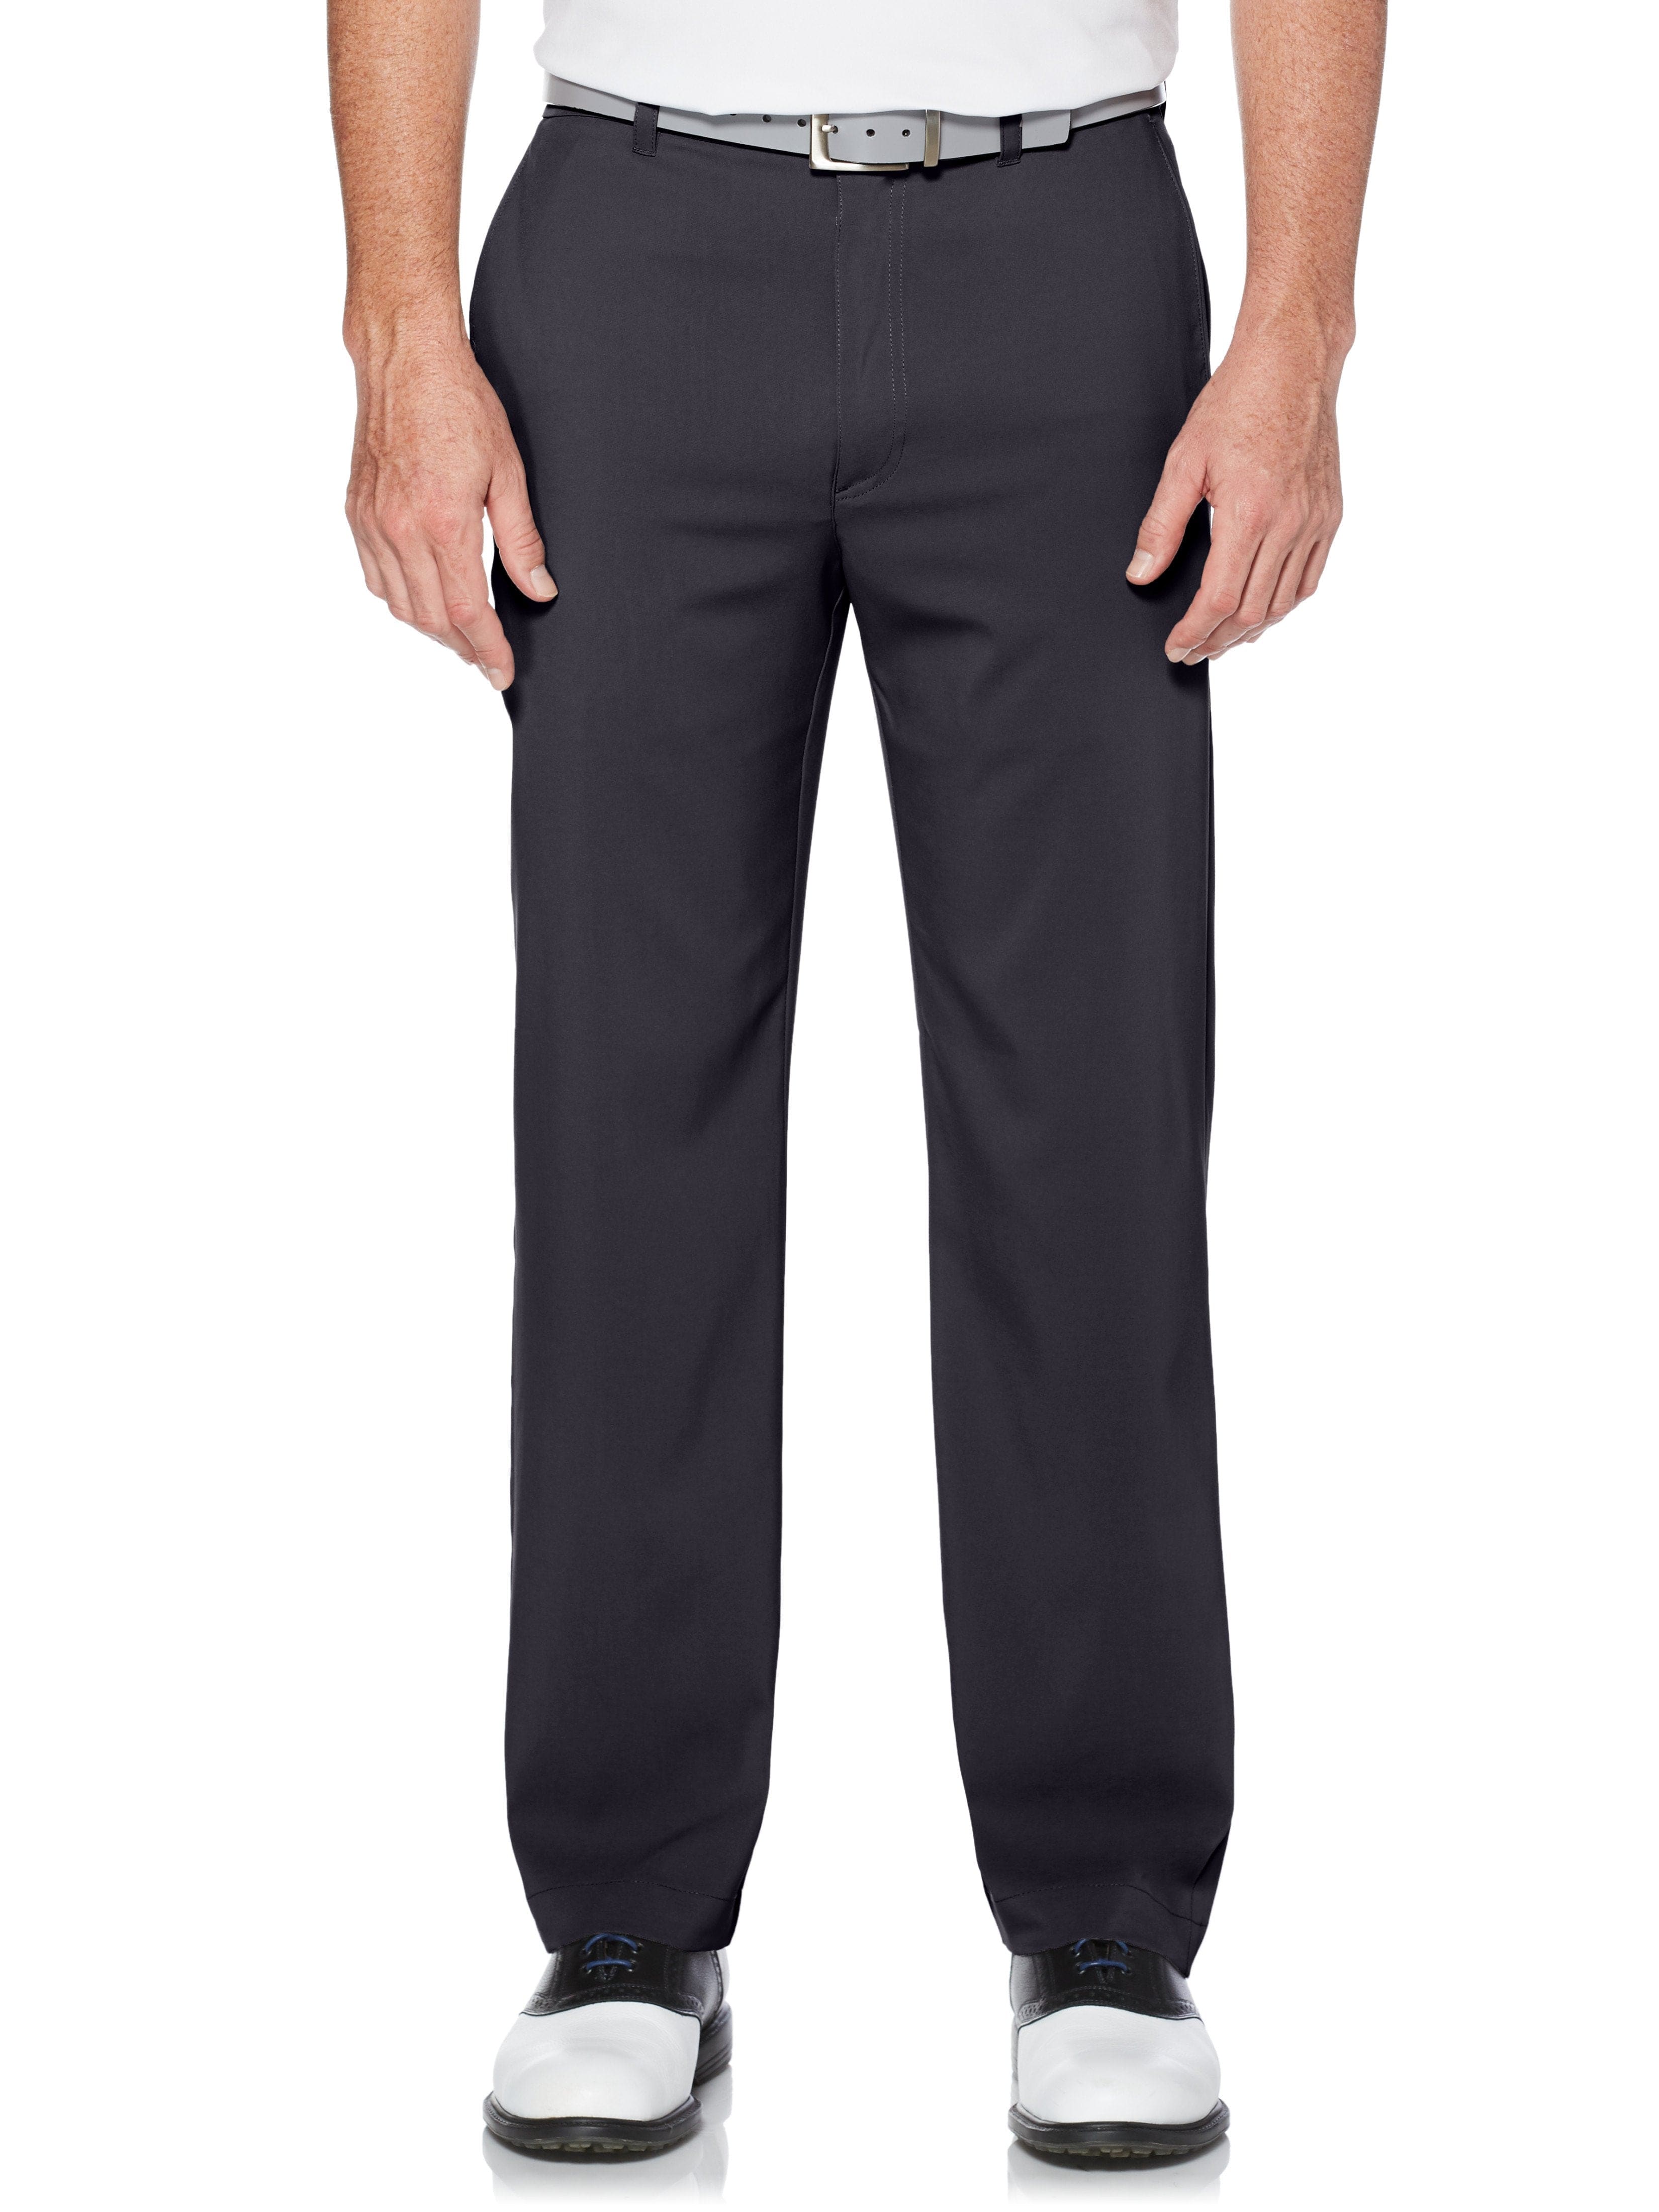 Mens Stretch Lightweight Classic Golf Pant with Active Waistband ...